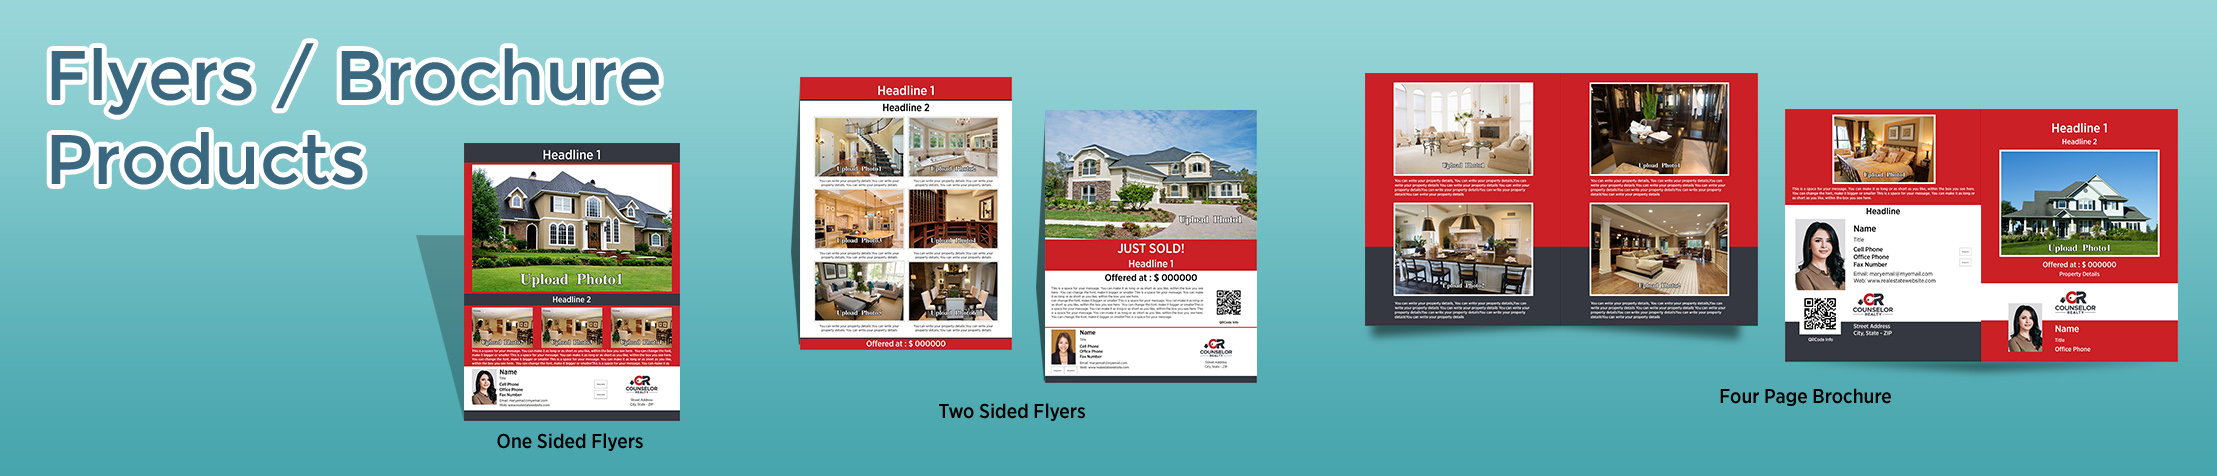 Counselor Realty Real Estate Flyers and Brochures - Counselor Realty flyer and brochure templates for open houses and marketing | BestPrintBuy.com